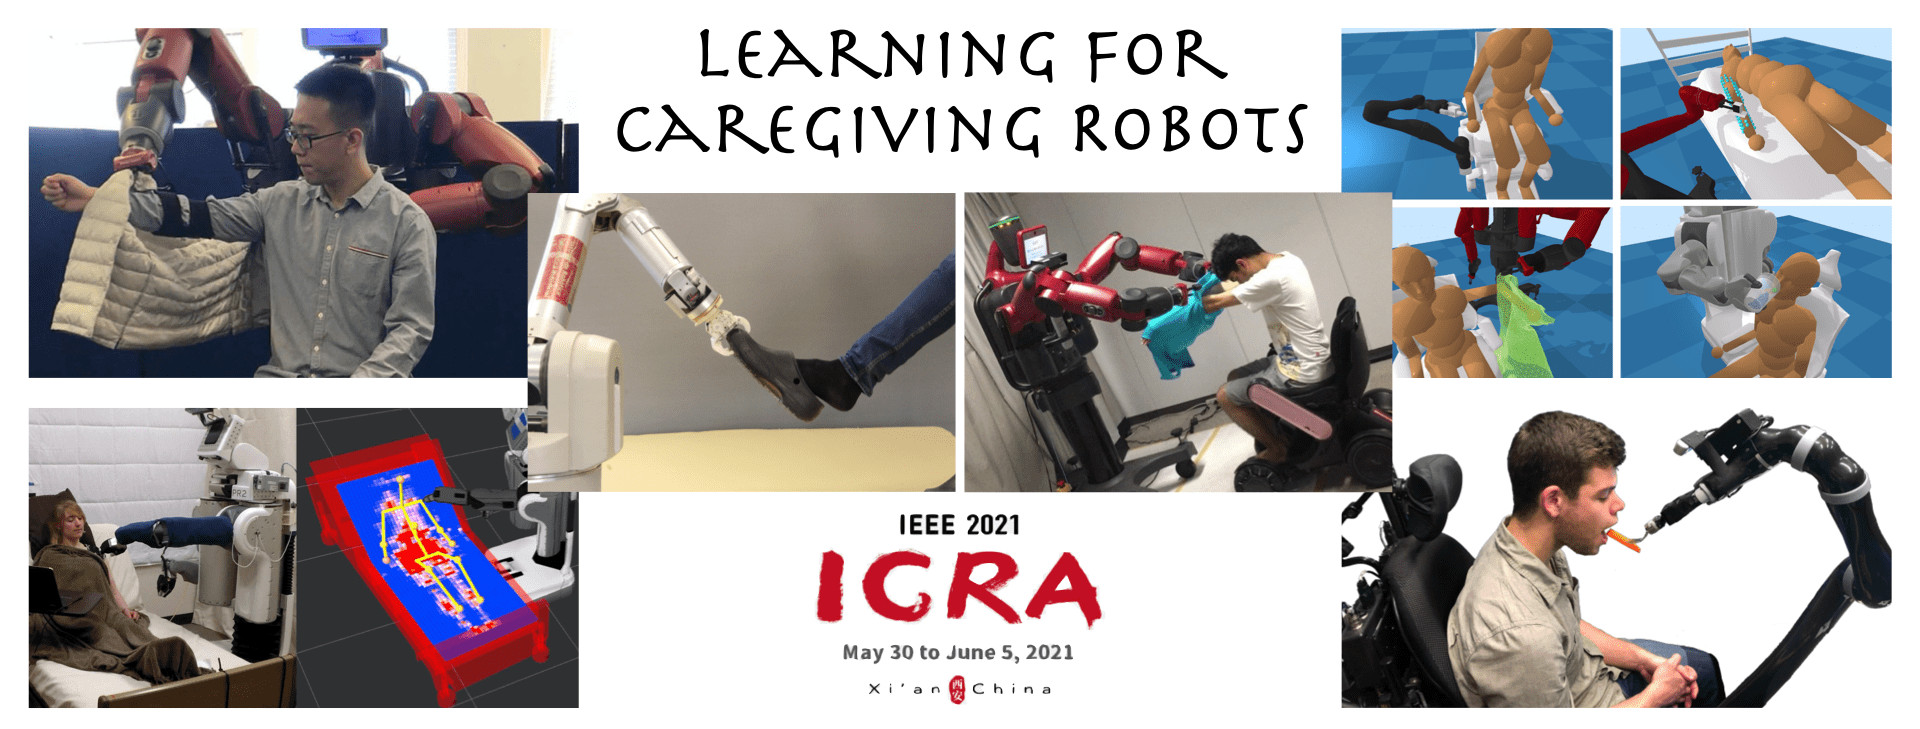 Learning for Caregiving Robots workshop at IEEE ICRA 2021